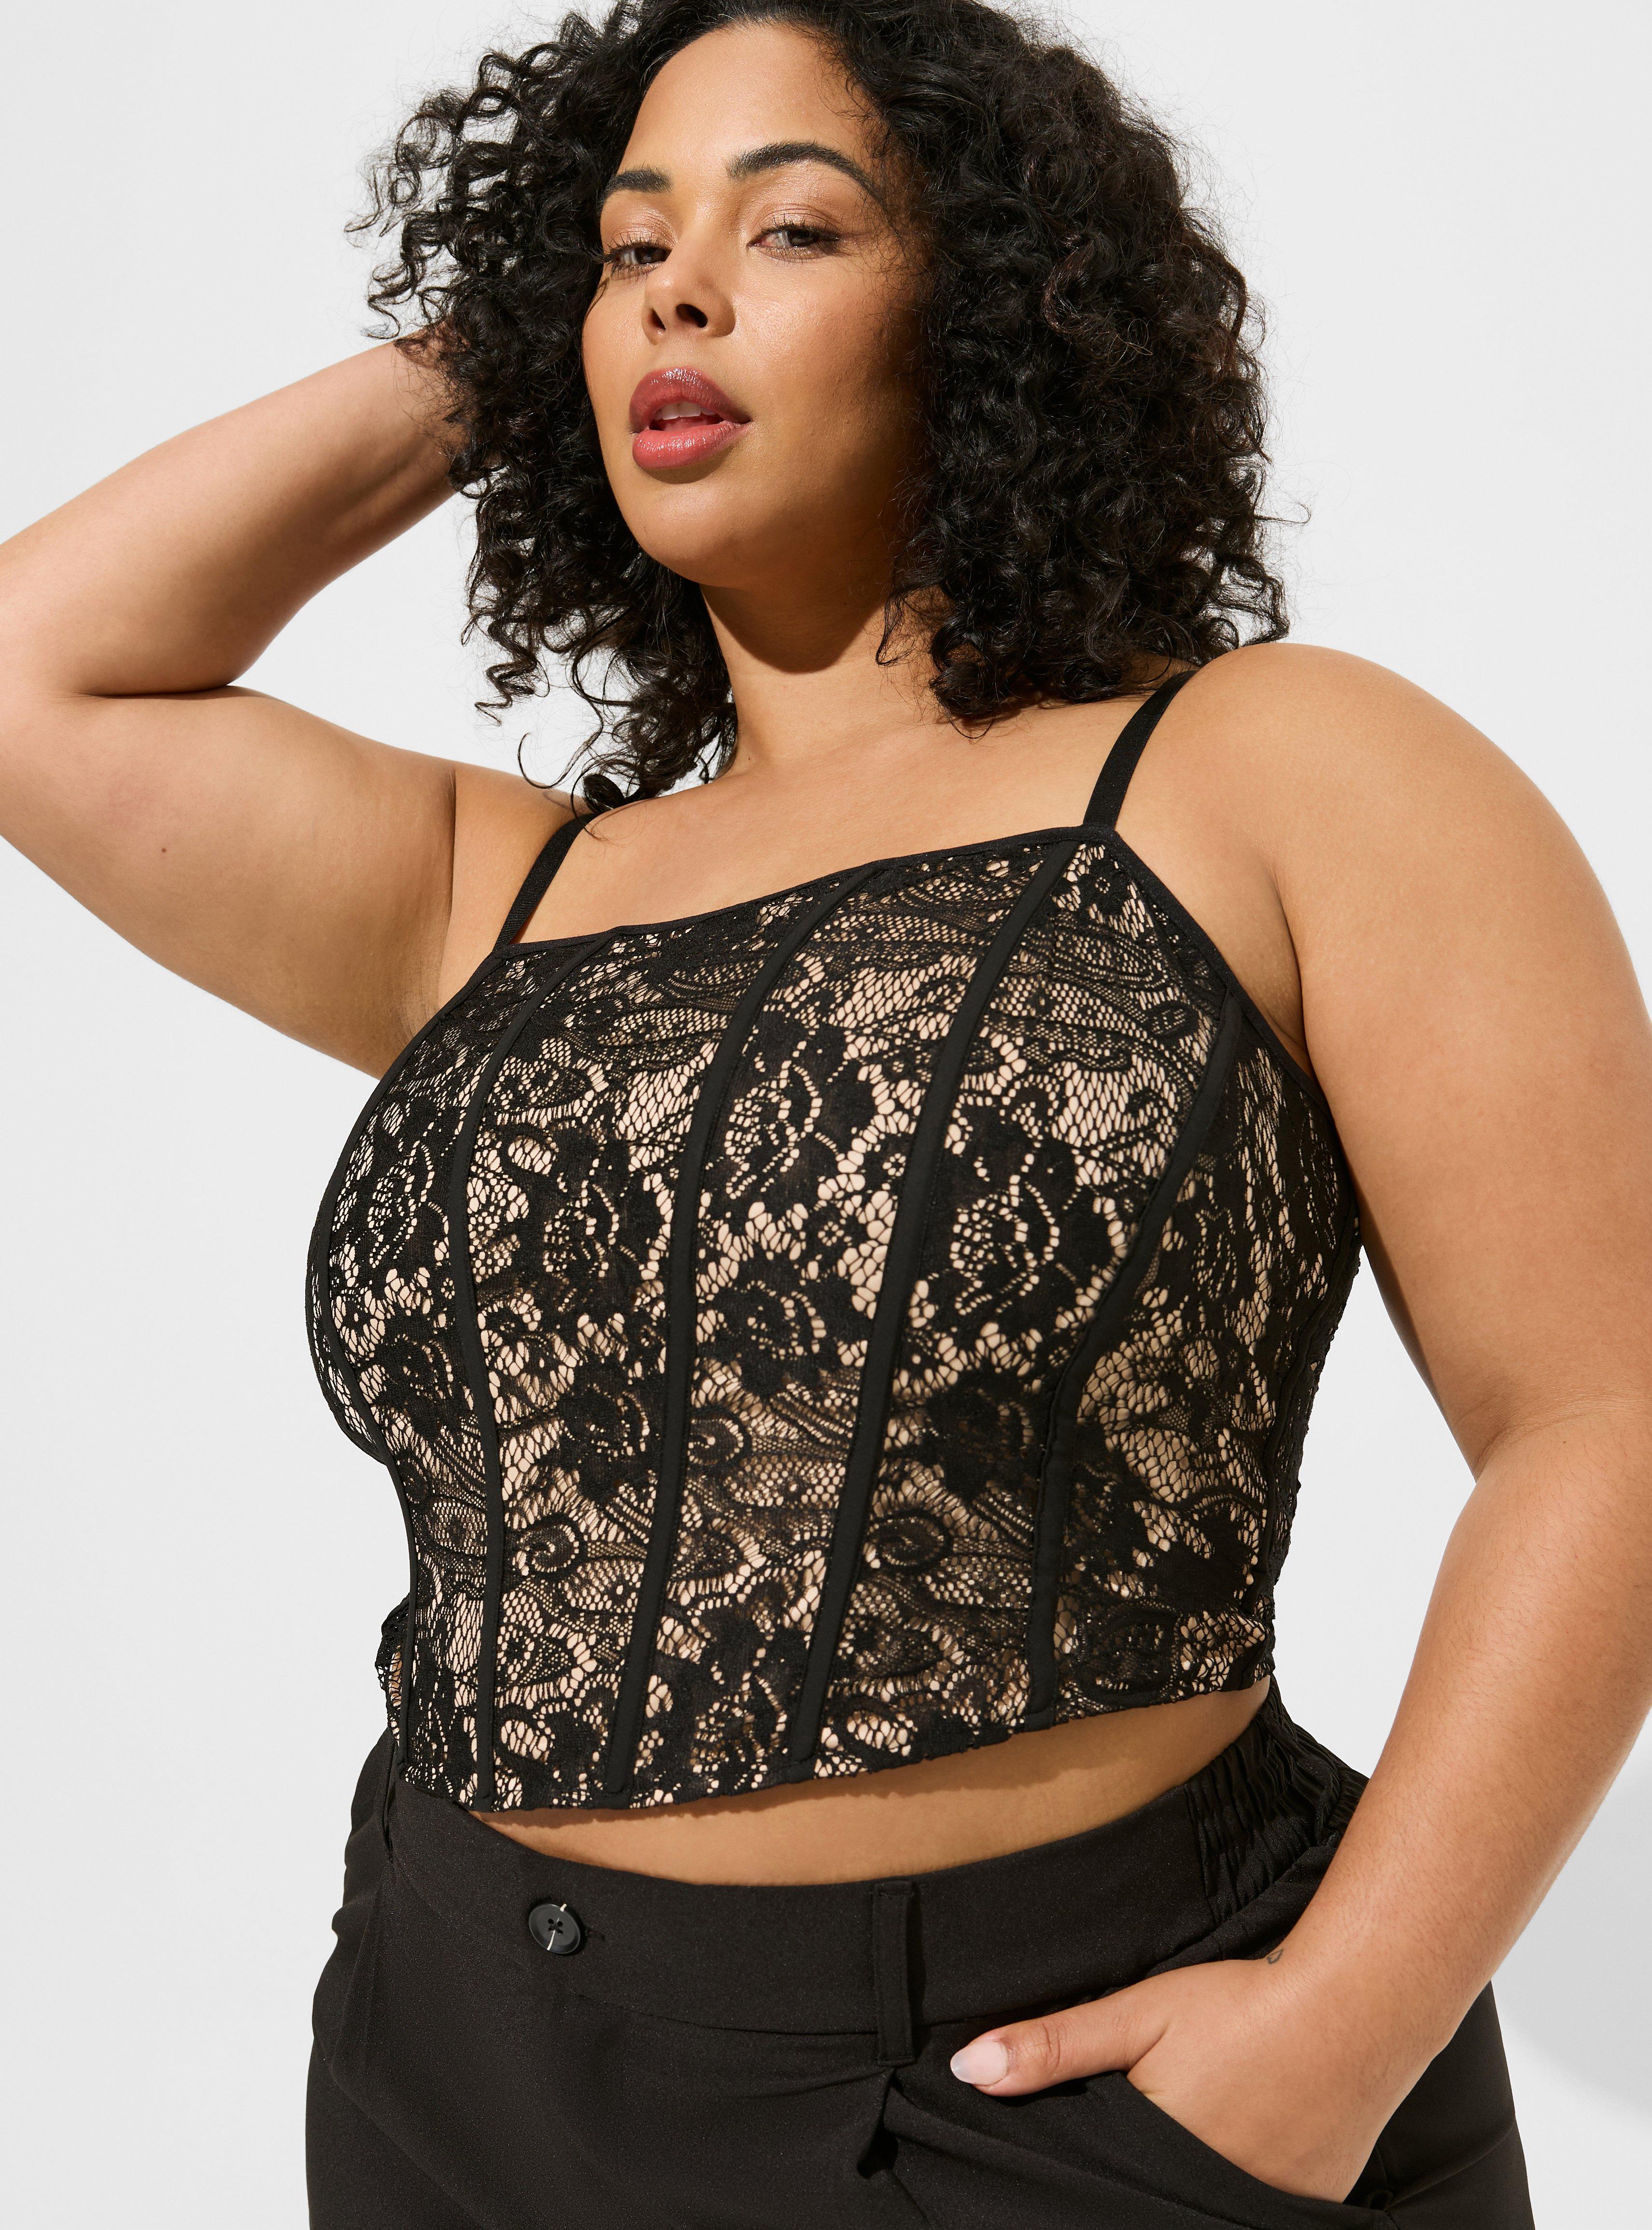 NWT plus sized bustier - Clothing